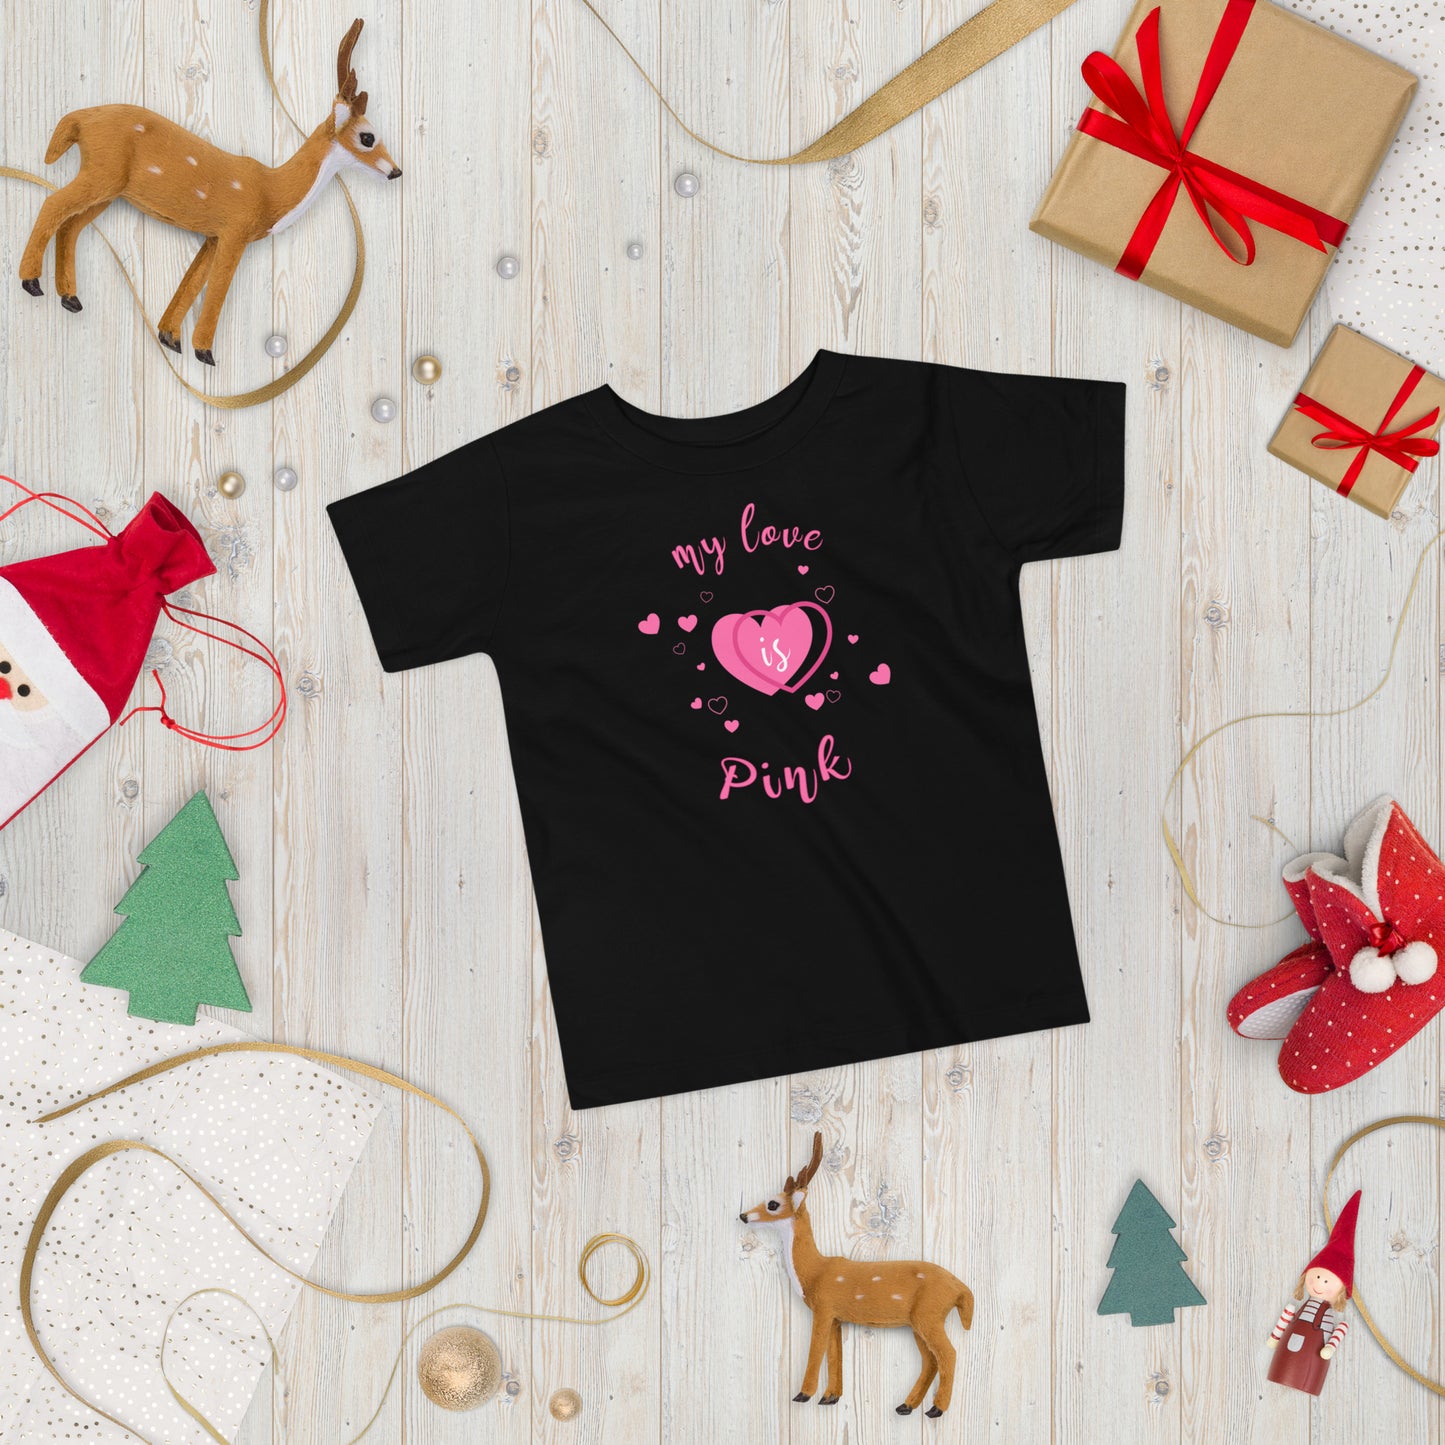 Baby T-Shirt "My love is Pink"